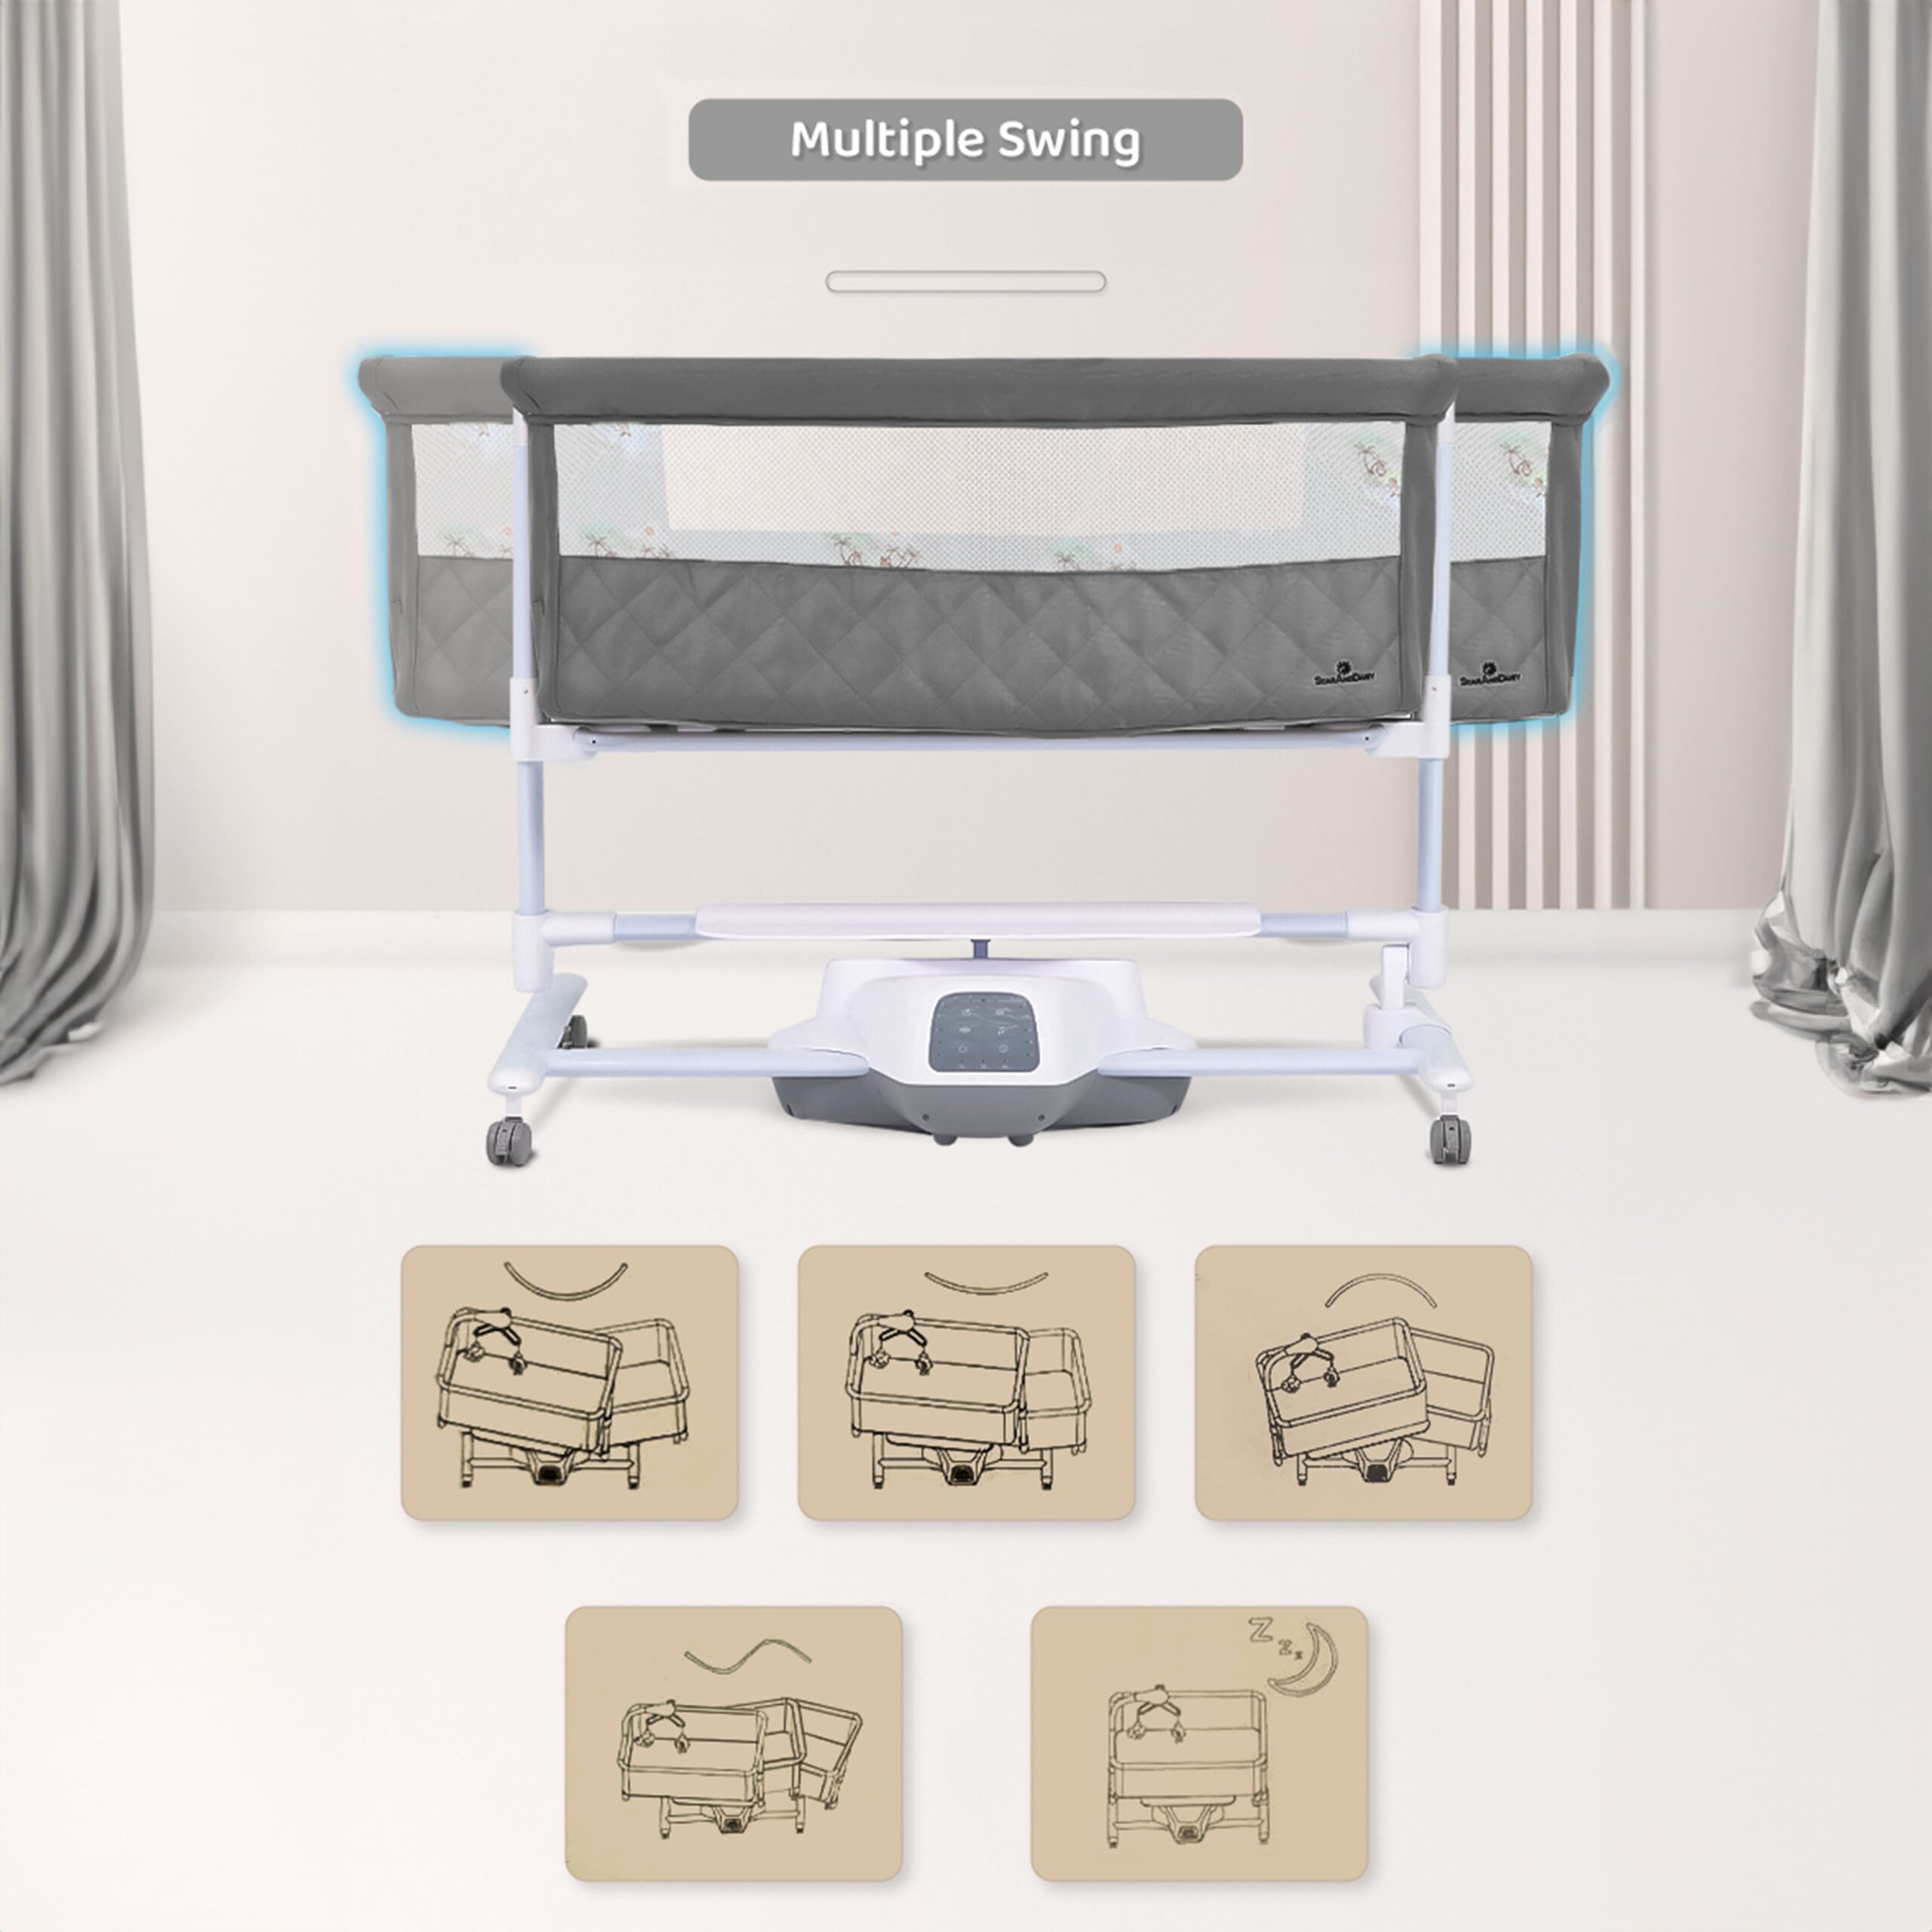 Automatic Rocking Baby Cradle with Wheels Seat Lock Mosquito Net Height Adjustment Bluetooth Music and Electric Toys-grey